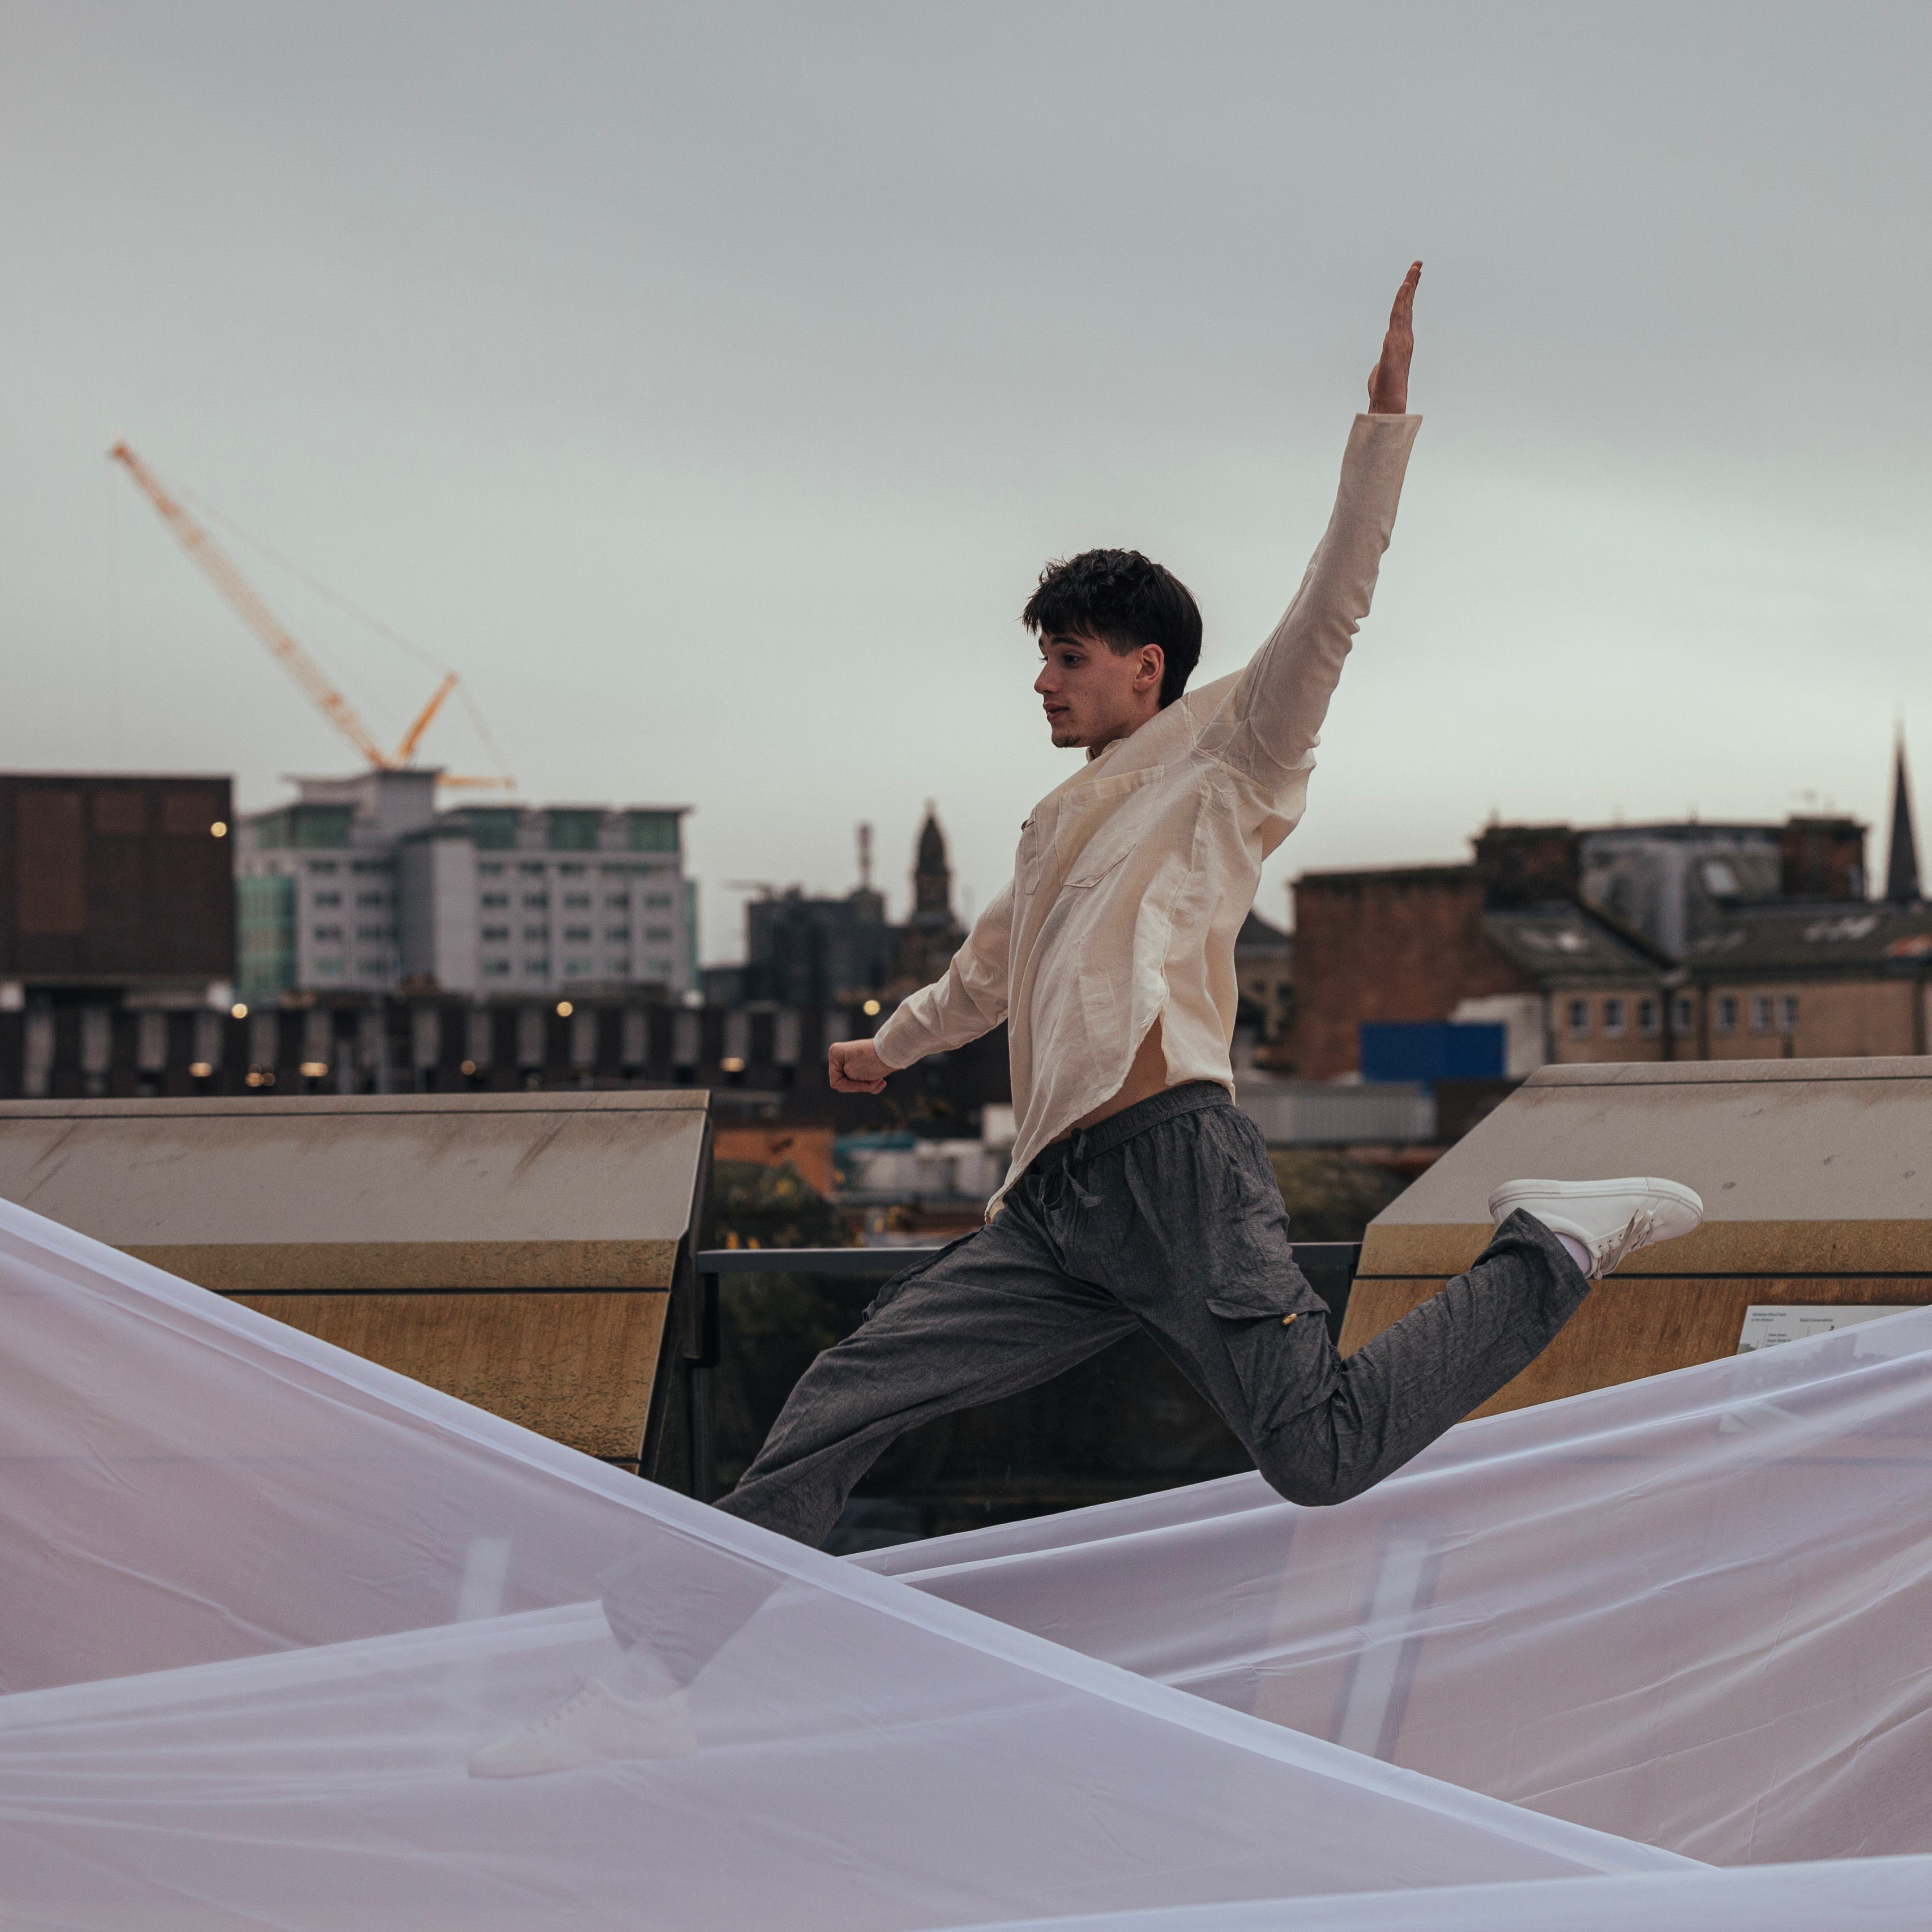 Photo of a young man dancing. He is mid-leap with one arm in the air. He is on a roof top with buildings in the background, and there are netted sheets surrounding him.